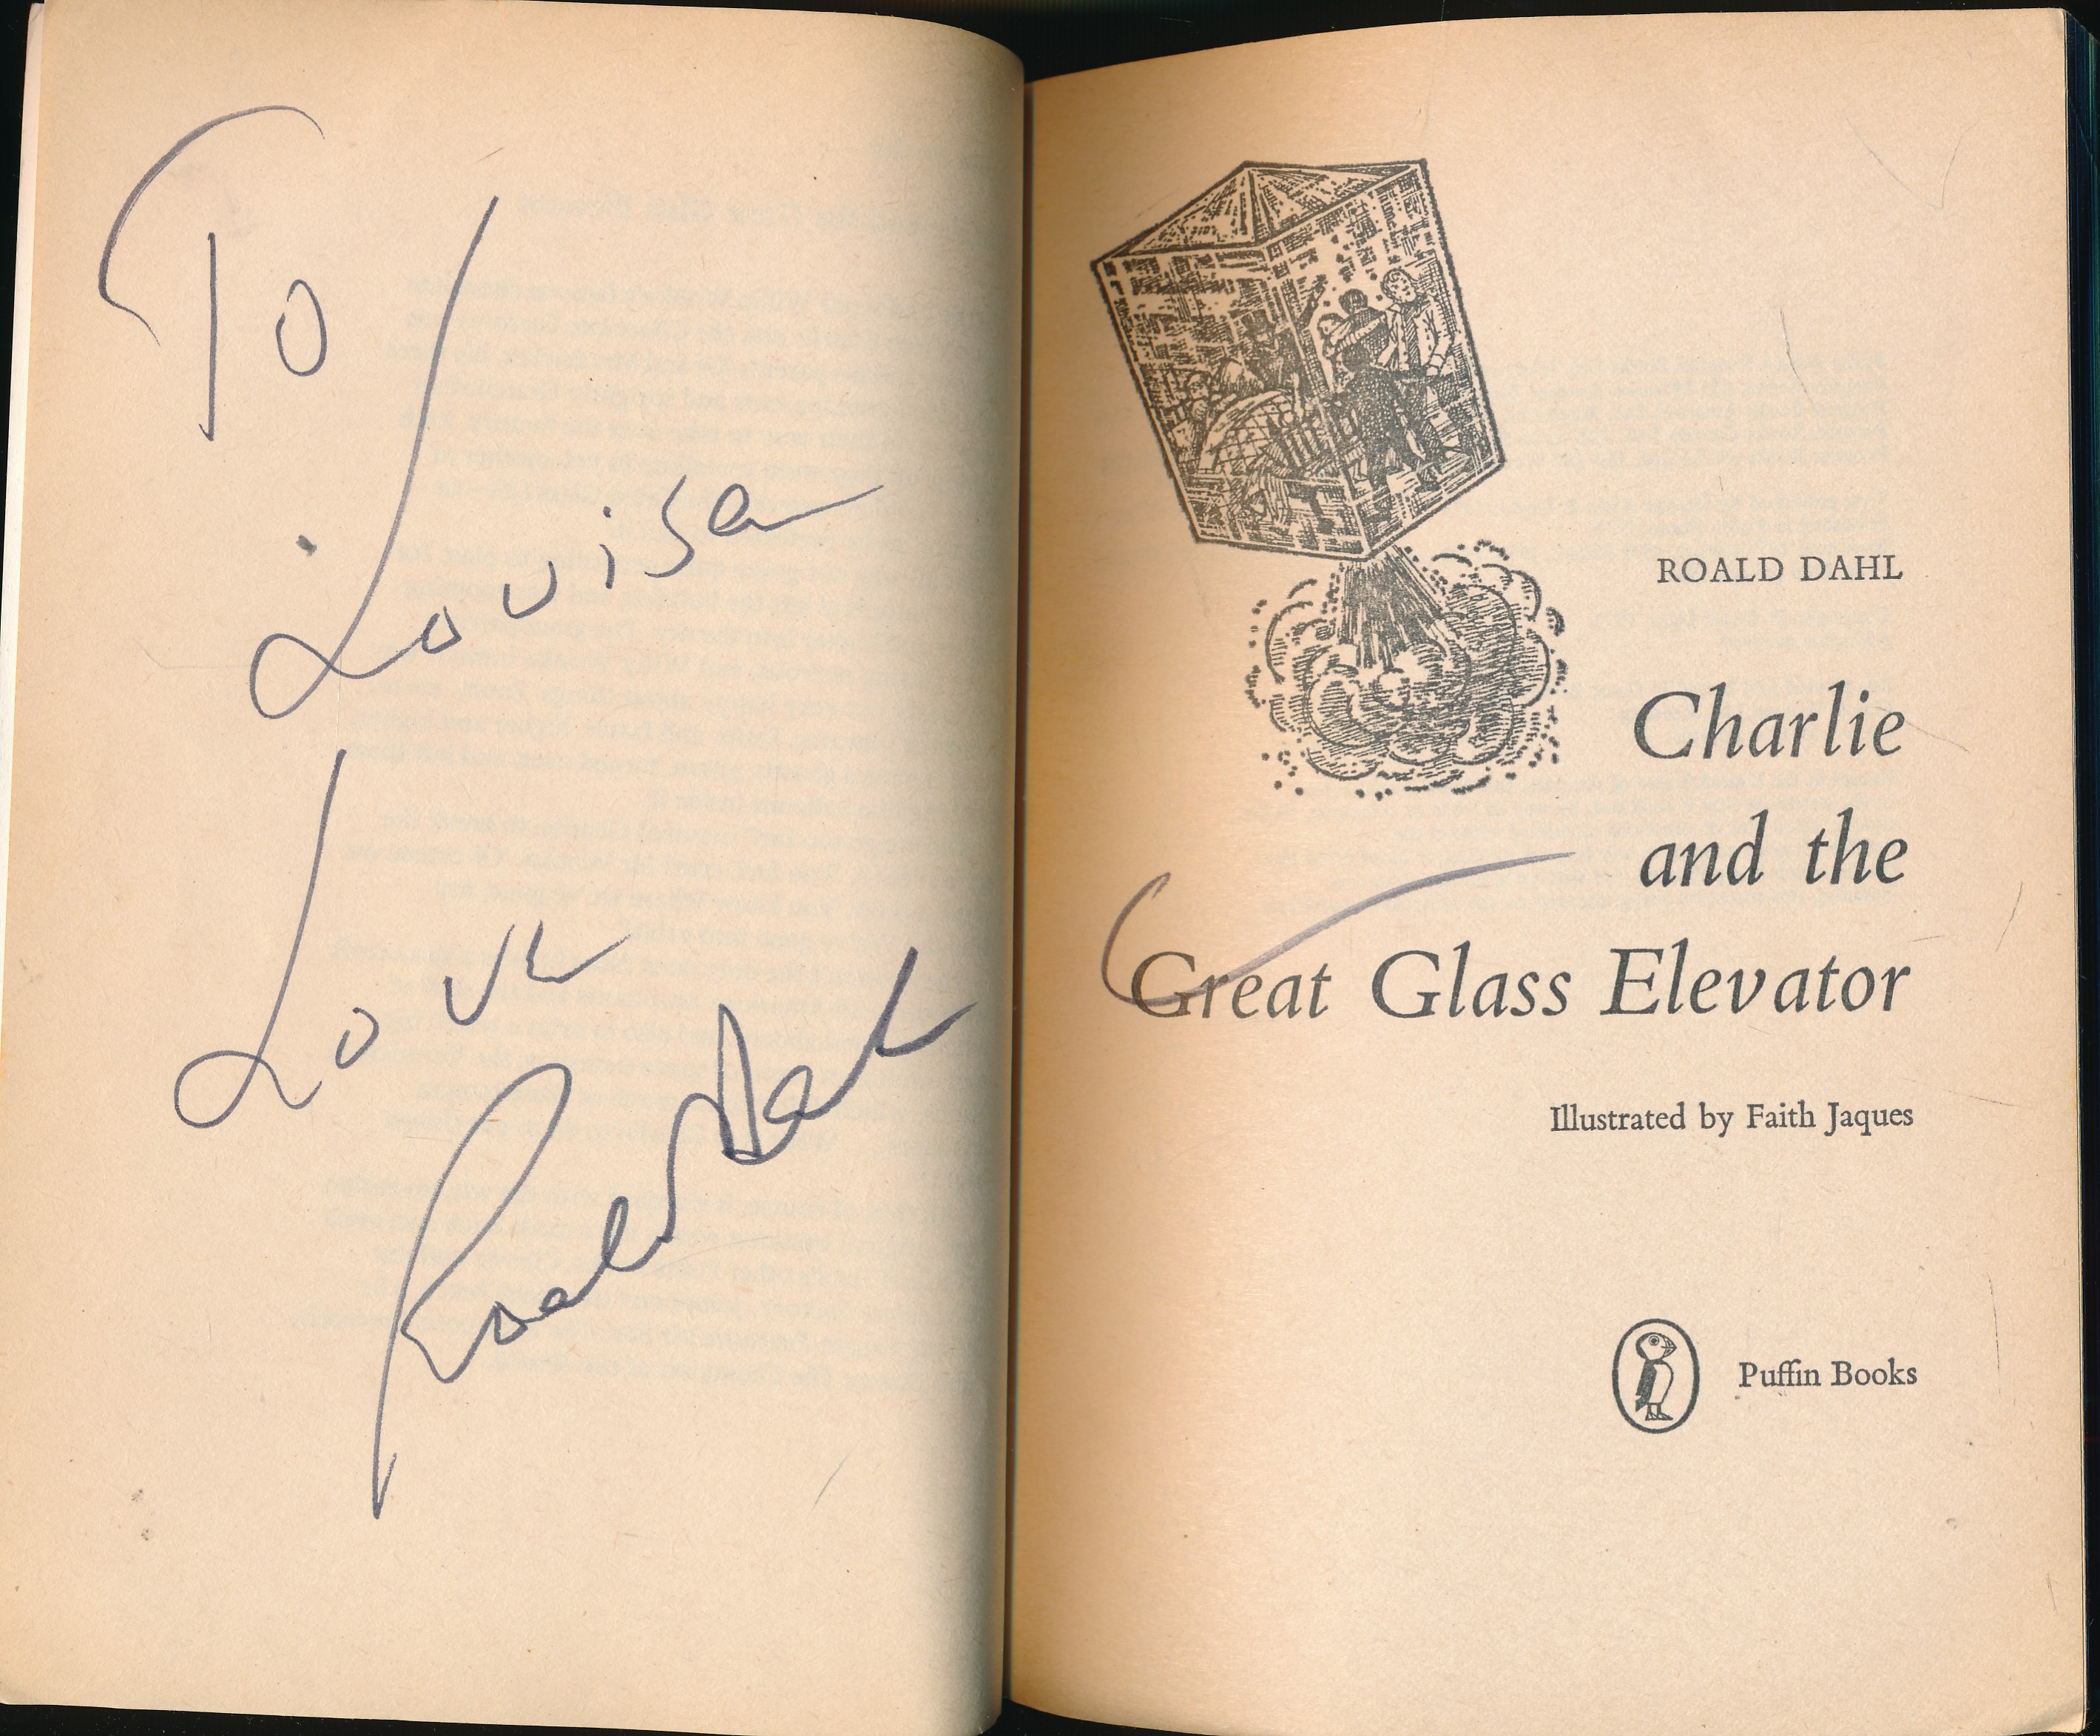 Charlie and the Great Glass Elevator. Signed copy.